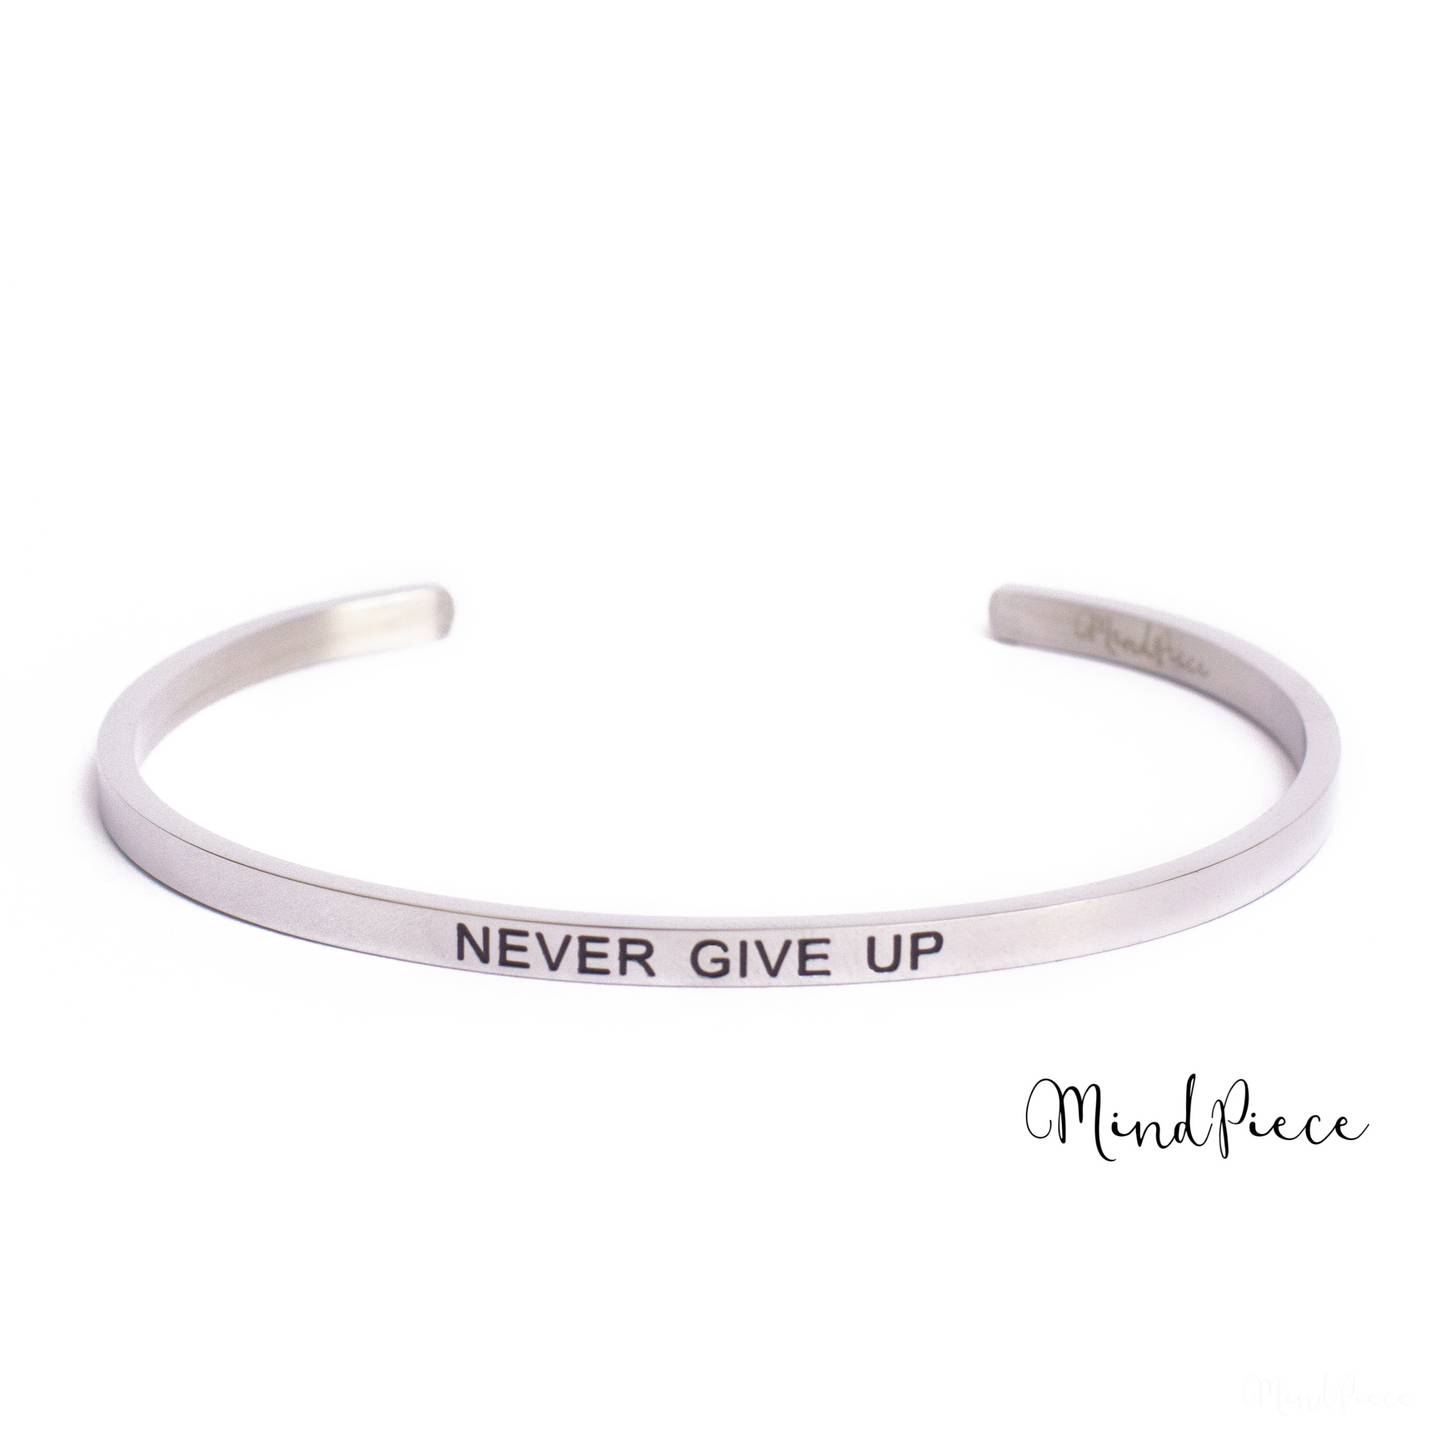 Bracelet quote |  never give up (1 pcs) - gold, silver & rose